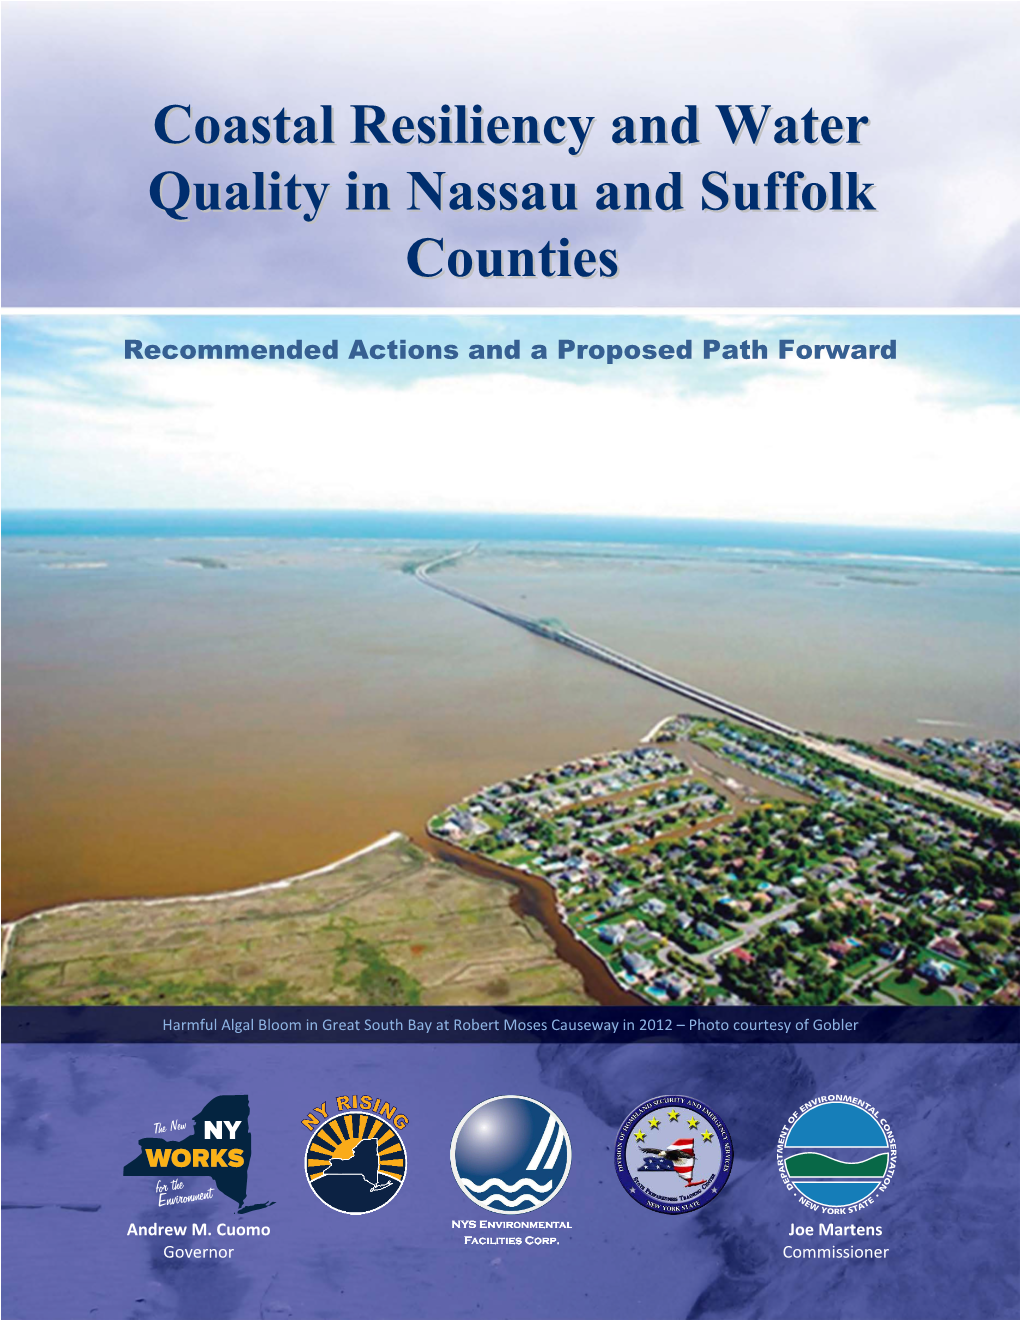 Coastal Resiliency and Water Quality in Nassau and Suffolk Counties